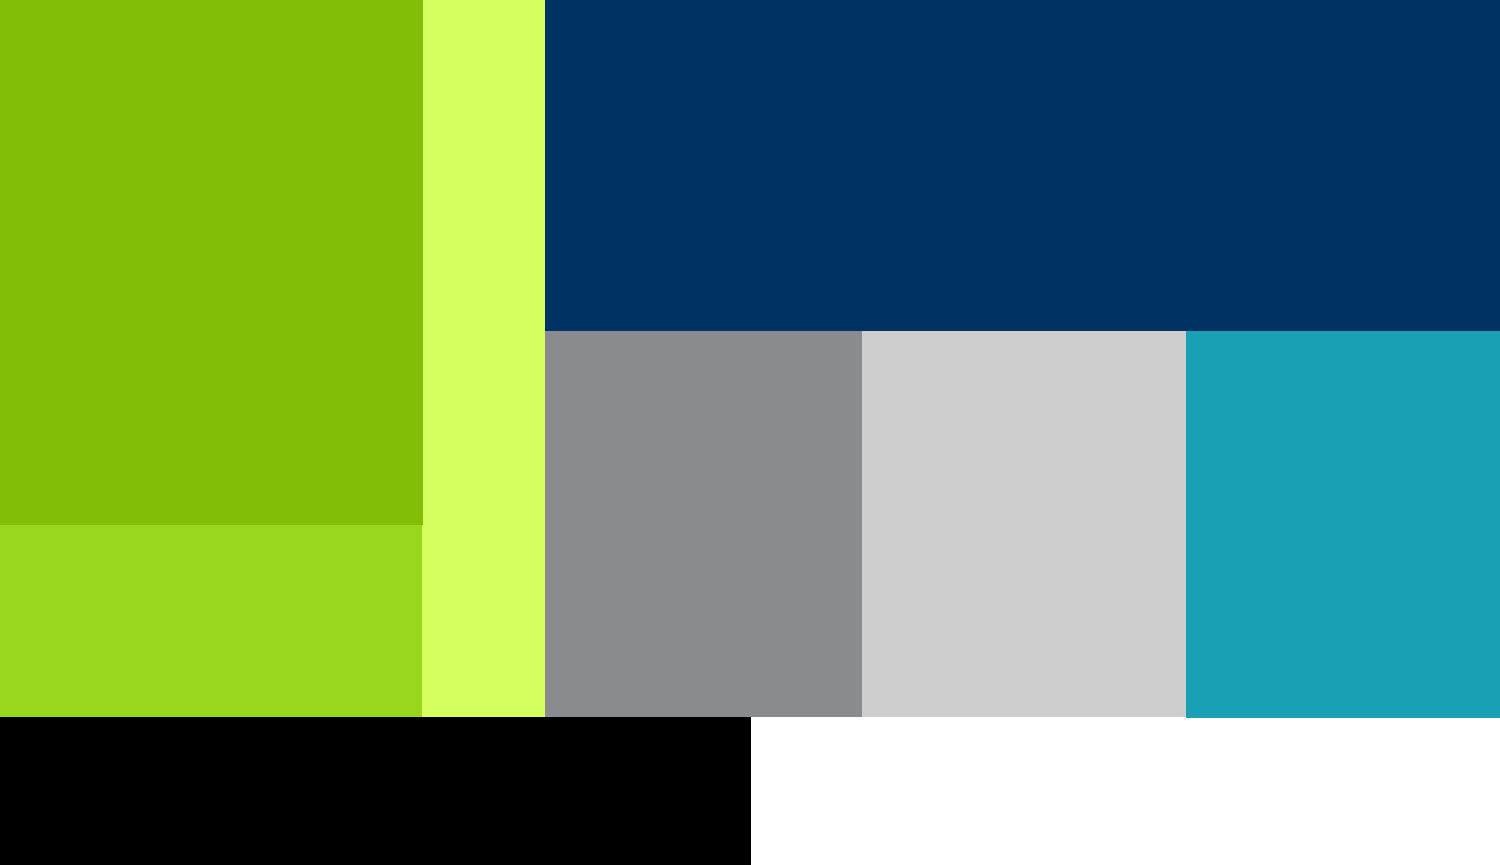 Alternate color palette for GoalPath solutions; similar to the baseline palette shown above, but with less use of dark navy blue and the introduction of more fresh greens and pure whites